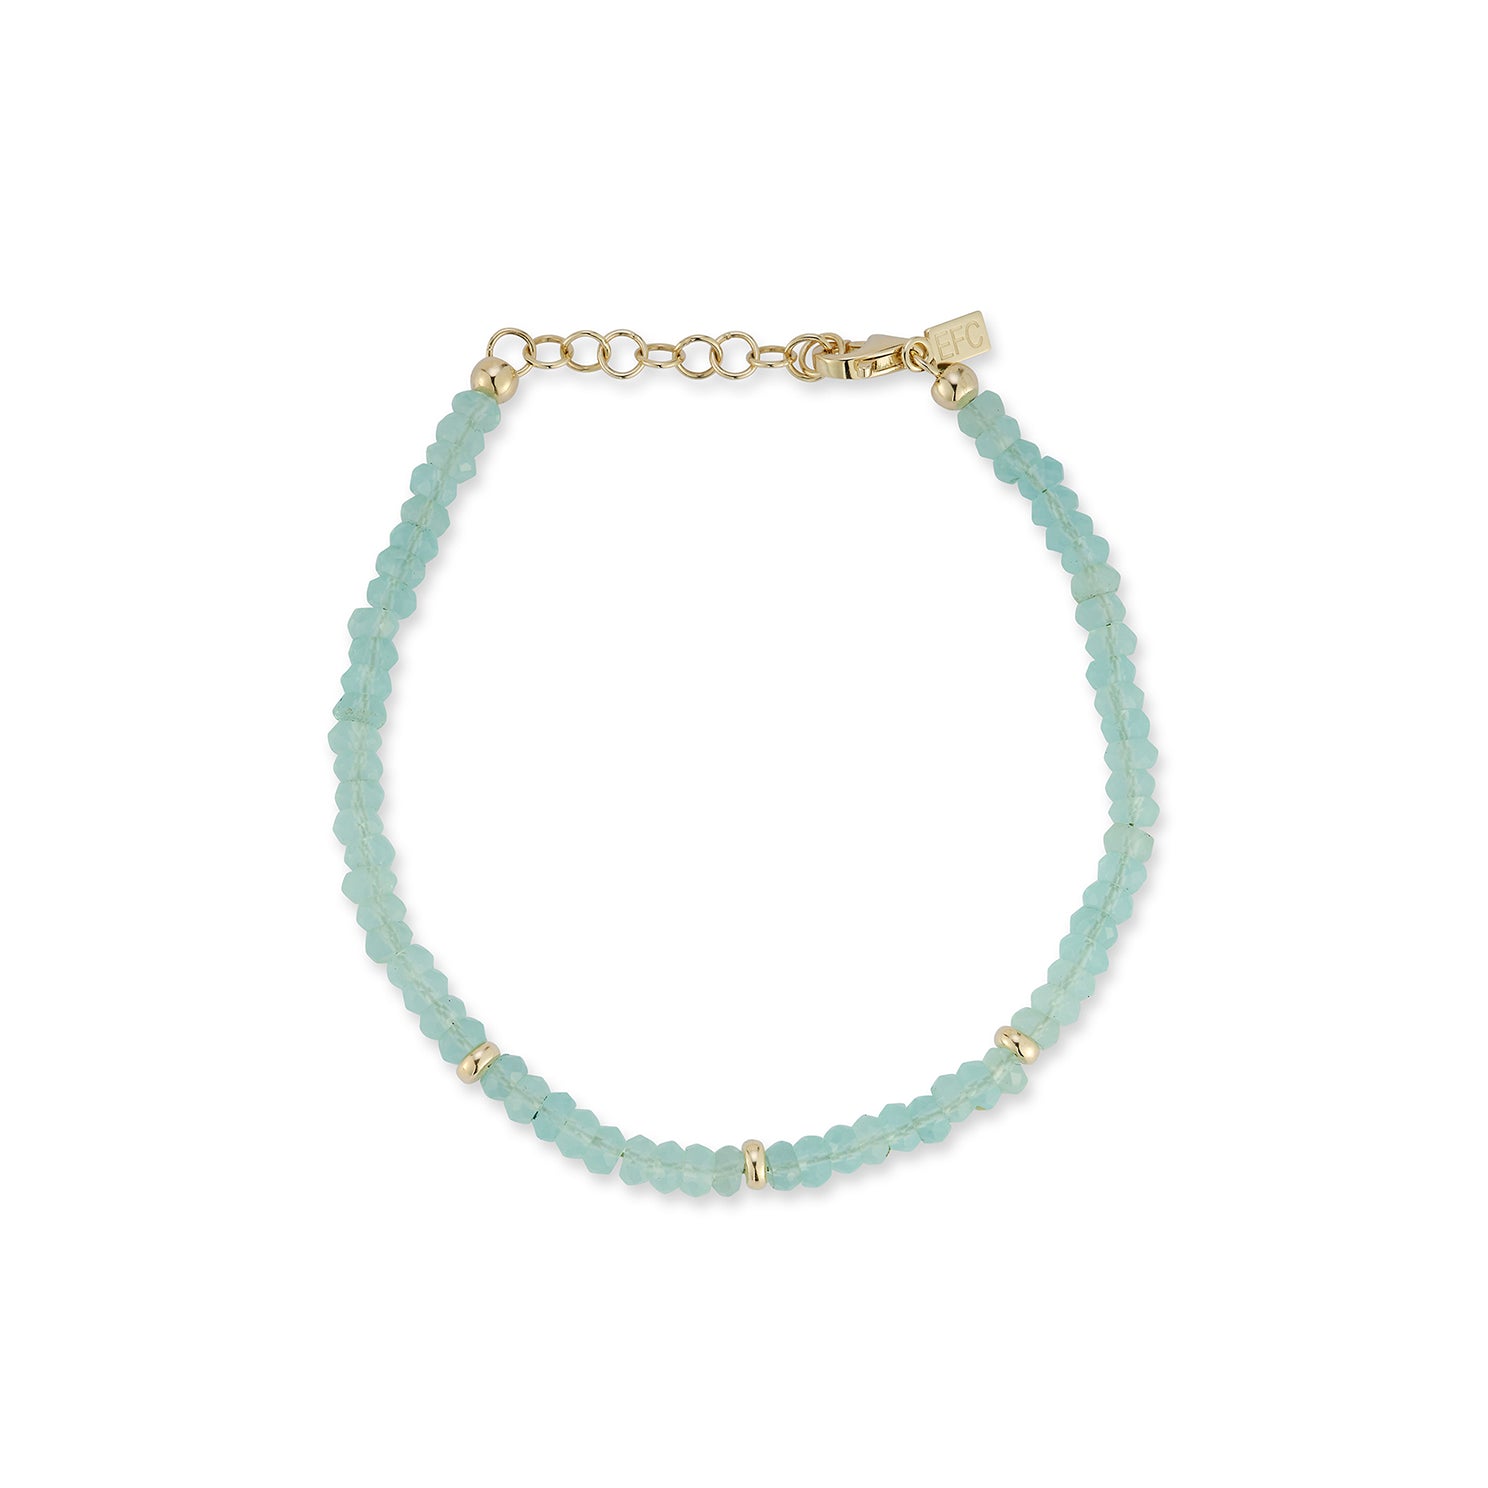 Birthstone Bead Bracelet In Chalcedony with 14k yellow gold chain